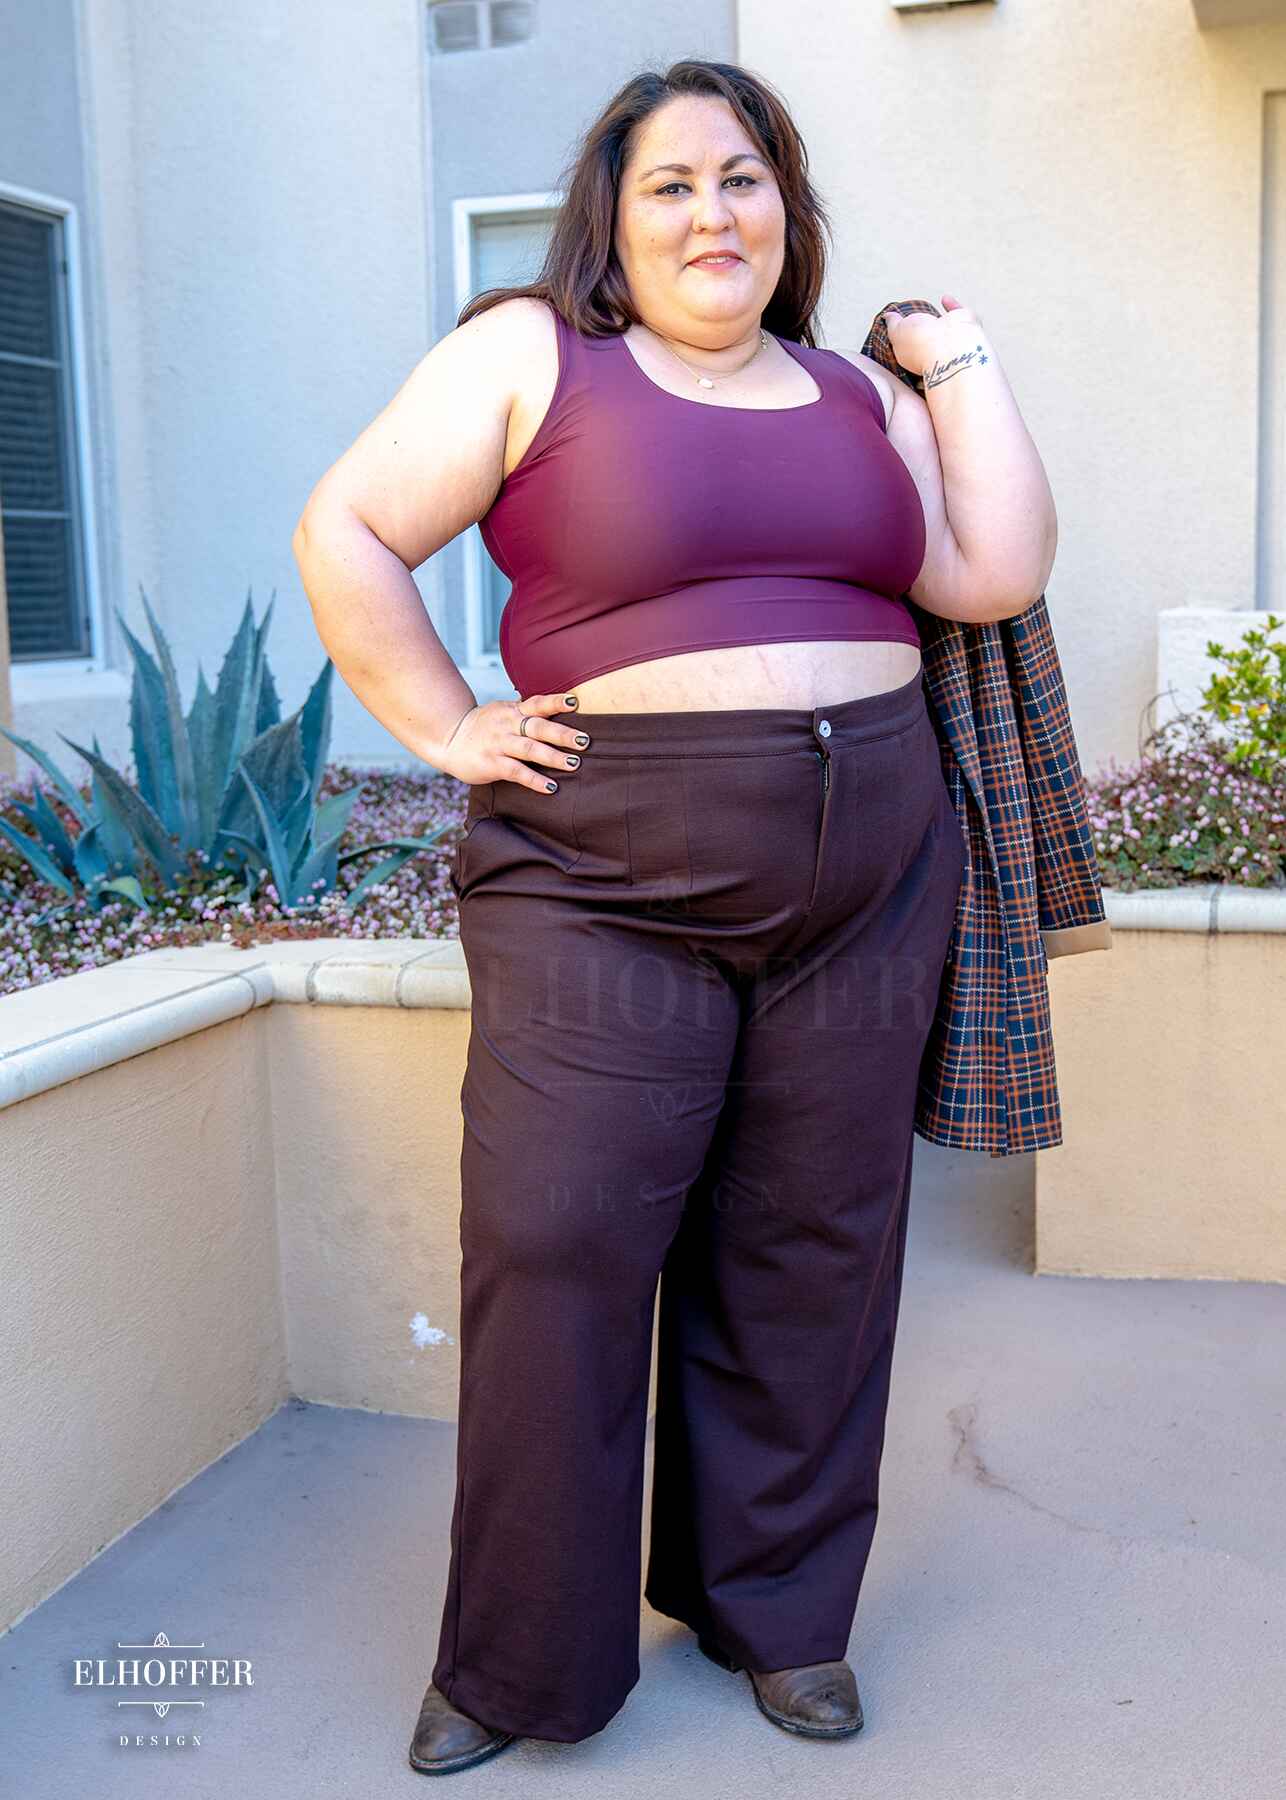 Alysia, a sun kissed skin 2xl model with long dark brown hair, is wearing chocolate brown wide leg trousers.  The trousers feature a front zipper and button closure, pleated front, side pockets, and elastic in the back of the waistband for adjustability and cinch. She paired the trousers with a dark purplish red scoop neck sleeveless crop top.